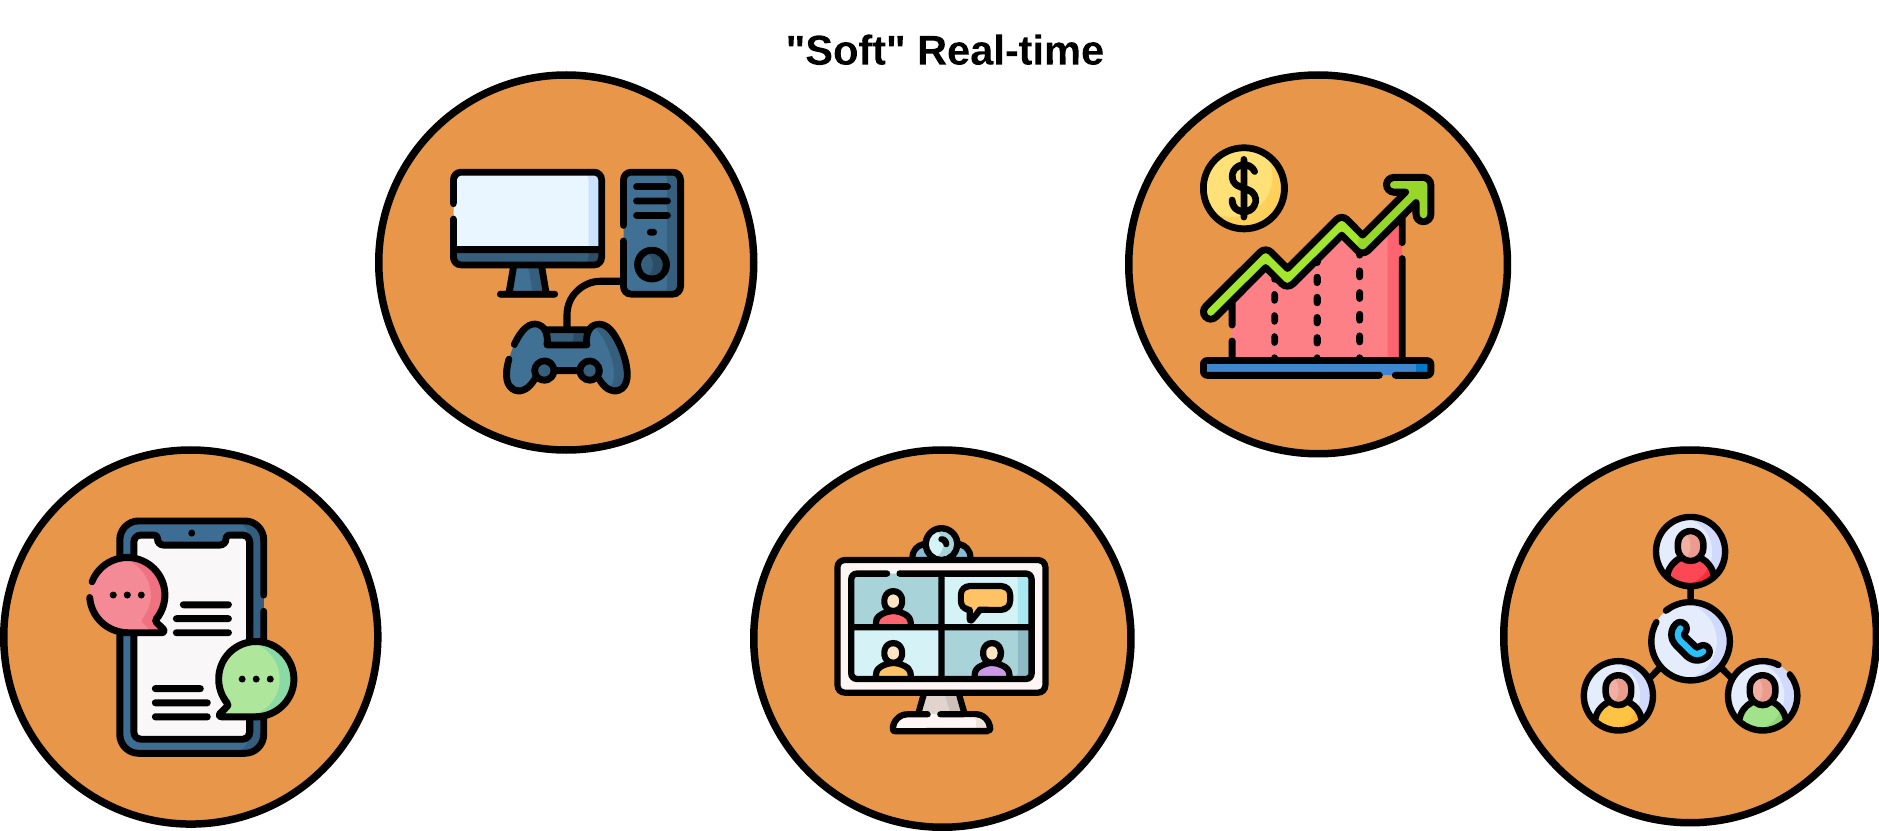 Diagram of soft real-time